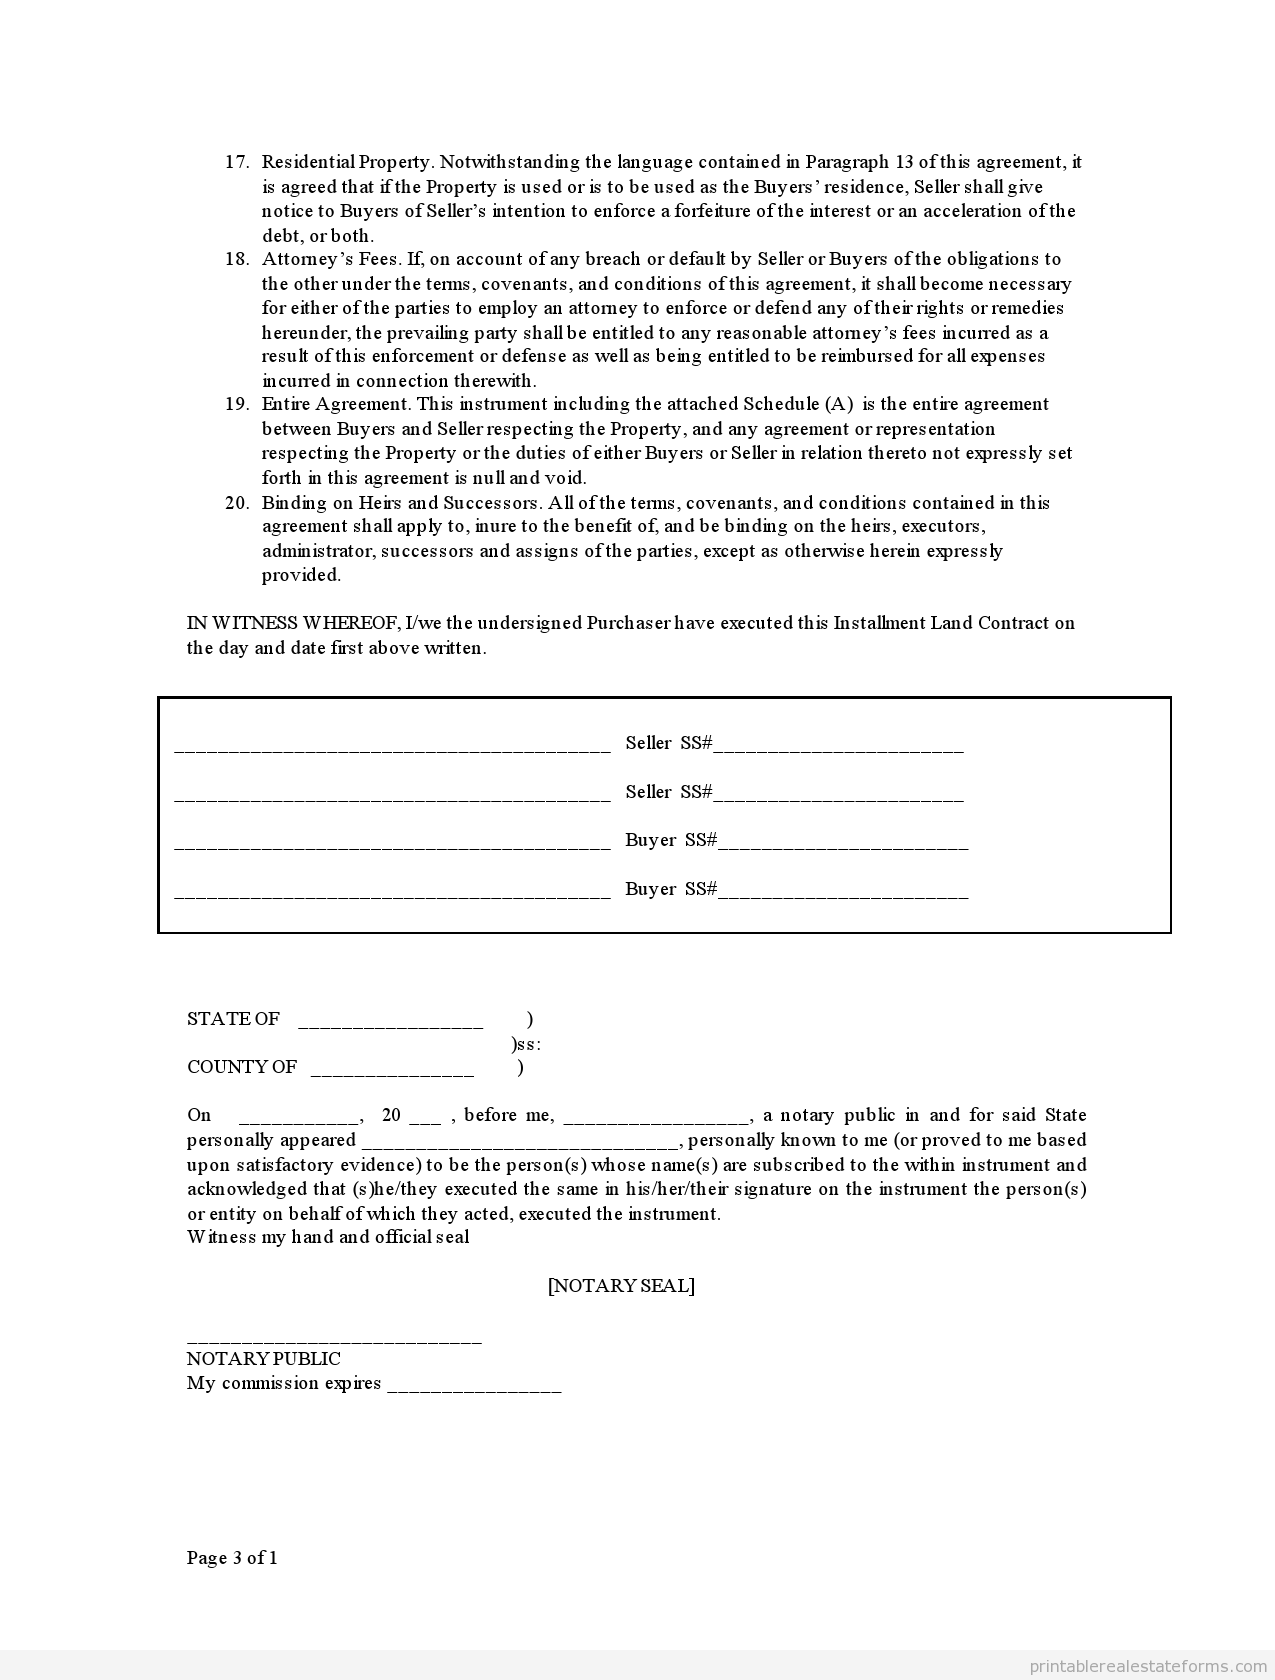 free-contract-for-deed-form-printable-real-estate-forms